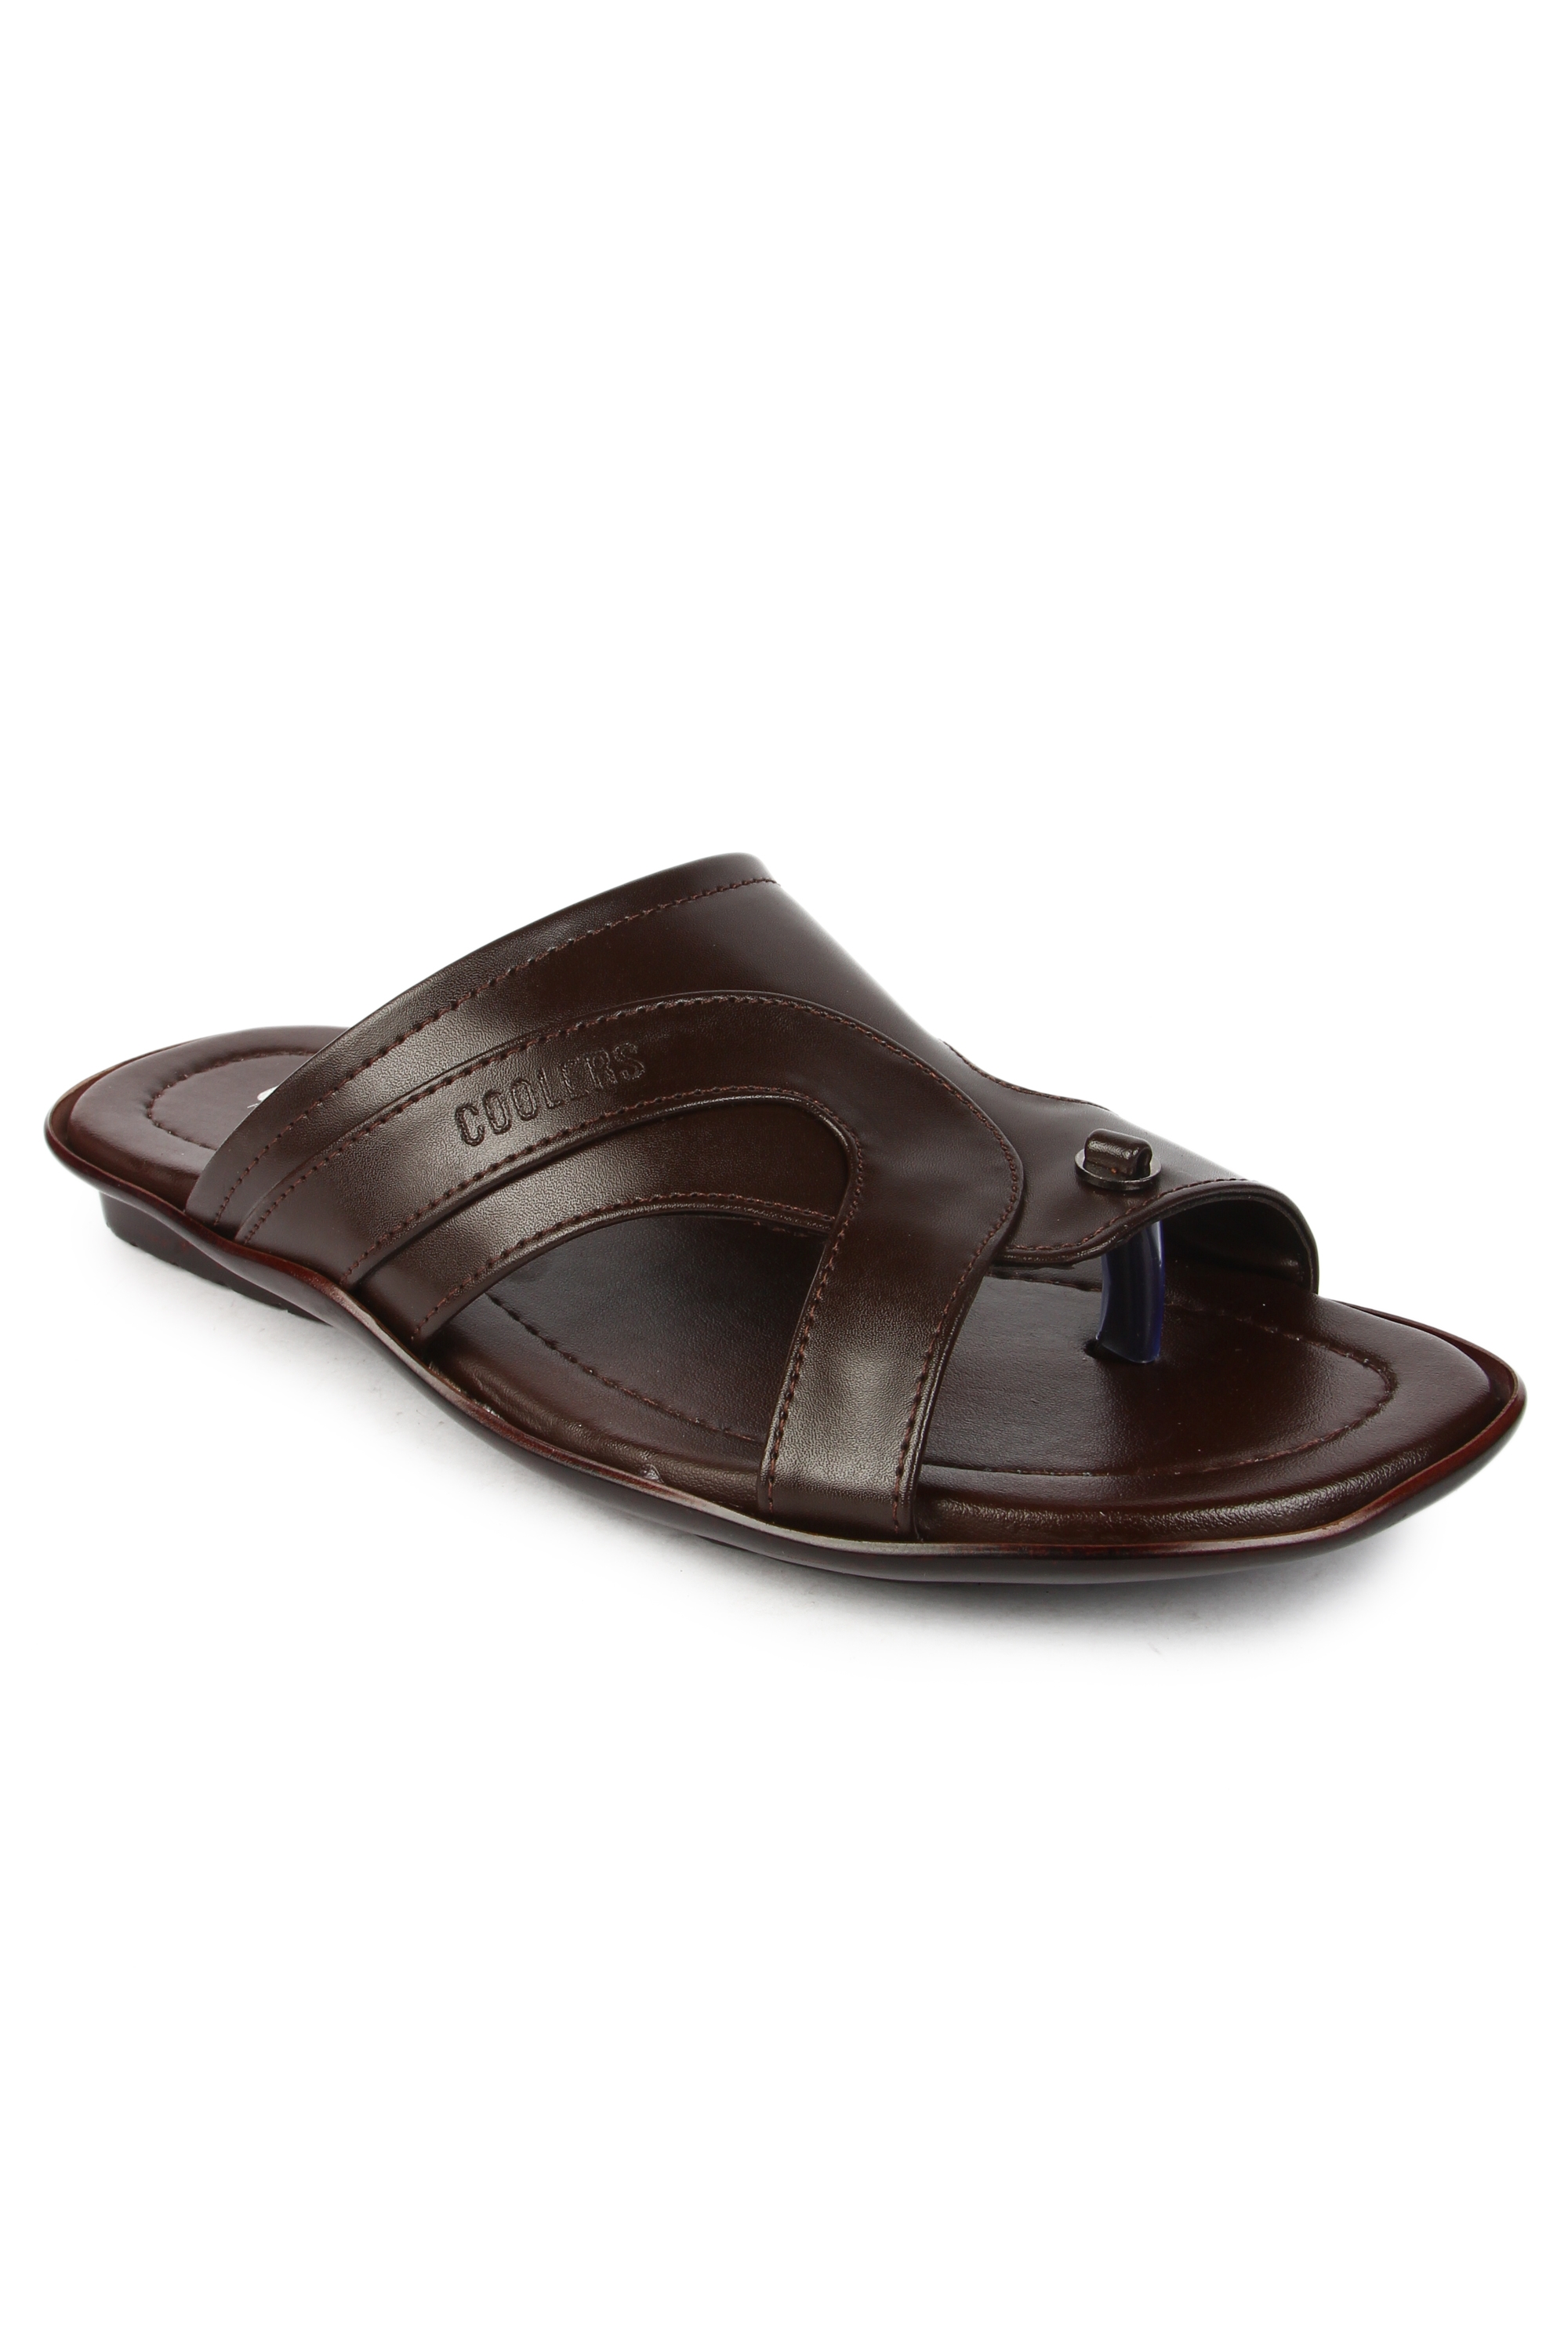 Liberty | Liberty Coolers Brown Formal Slippers COOL99-12_Brown For - Men